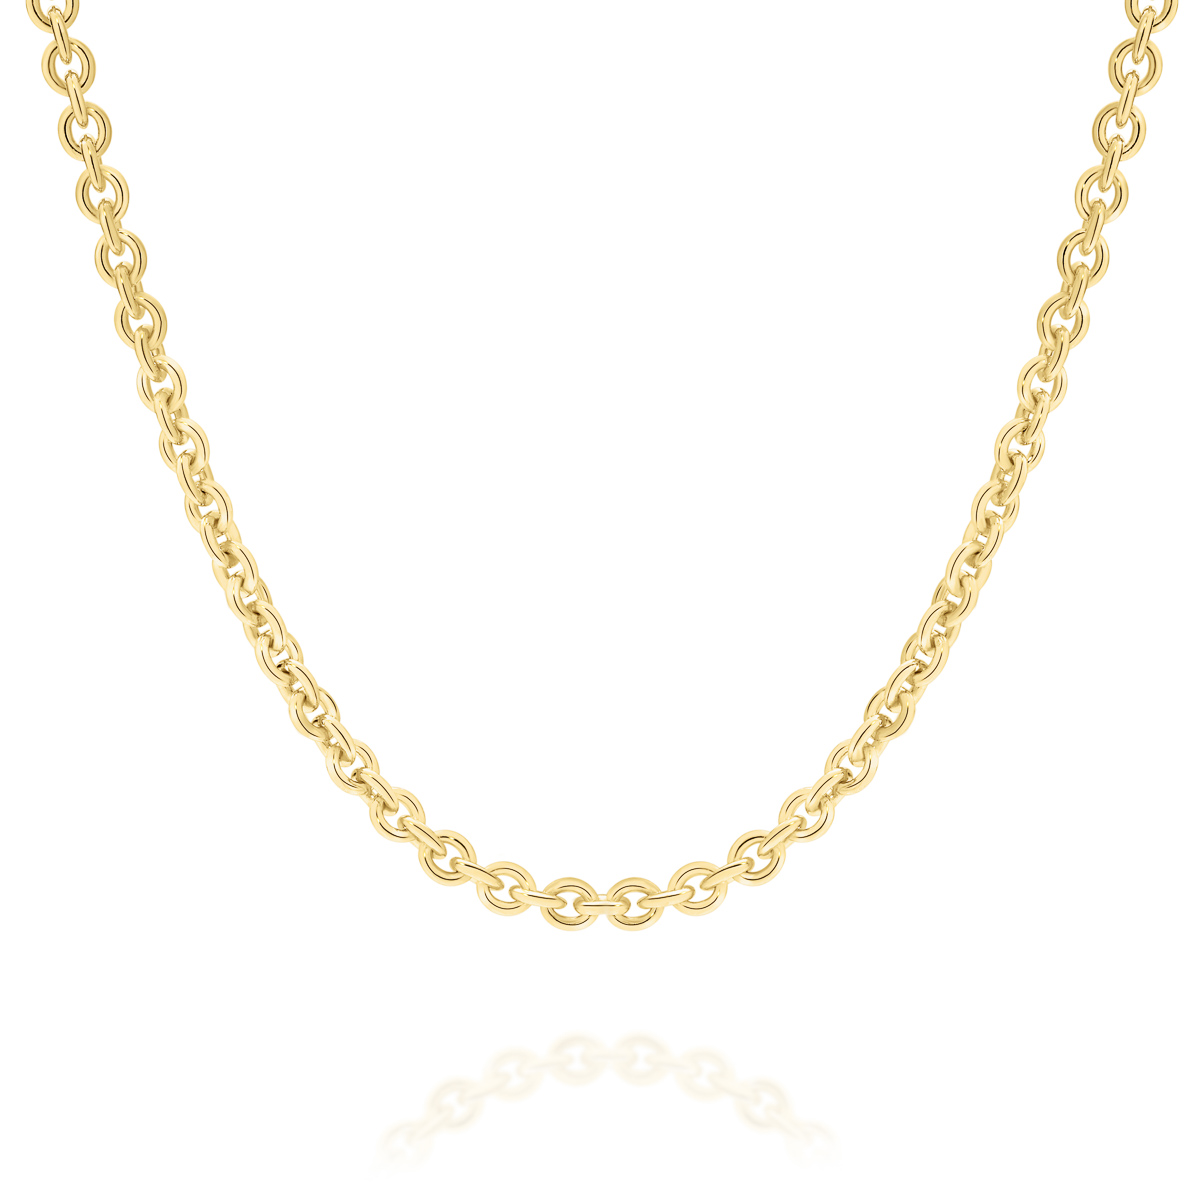 18K Yellow Gold Oval Link Polished Finish Chain- Medium - CRS050 YG